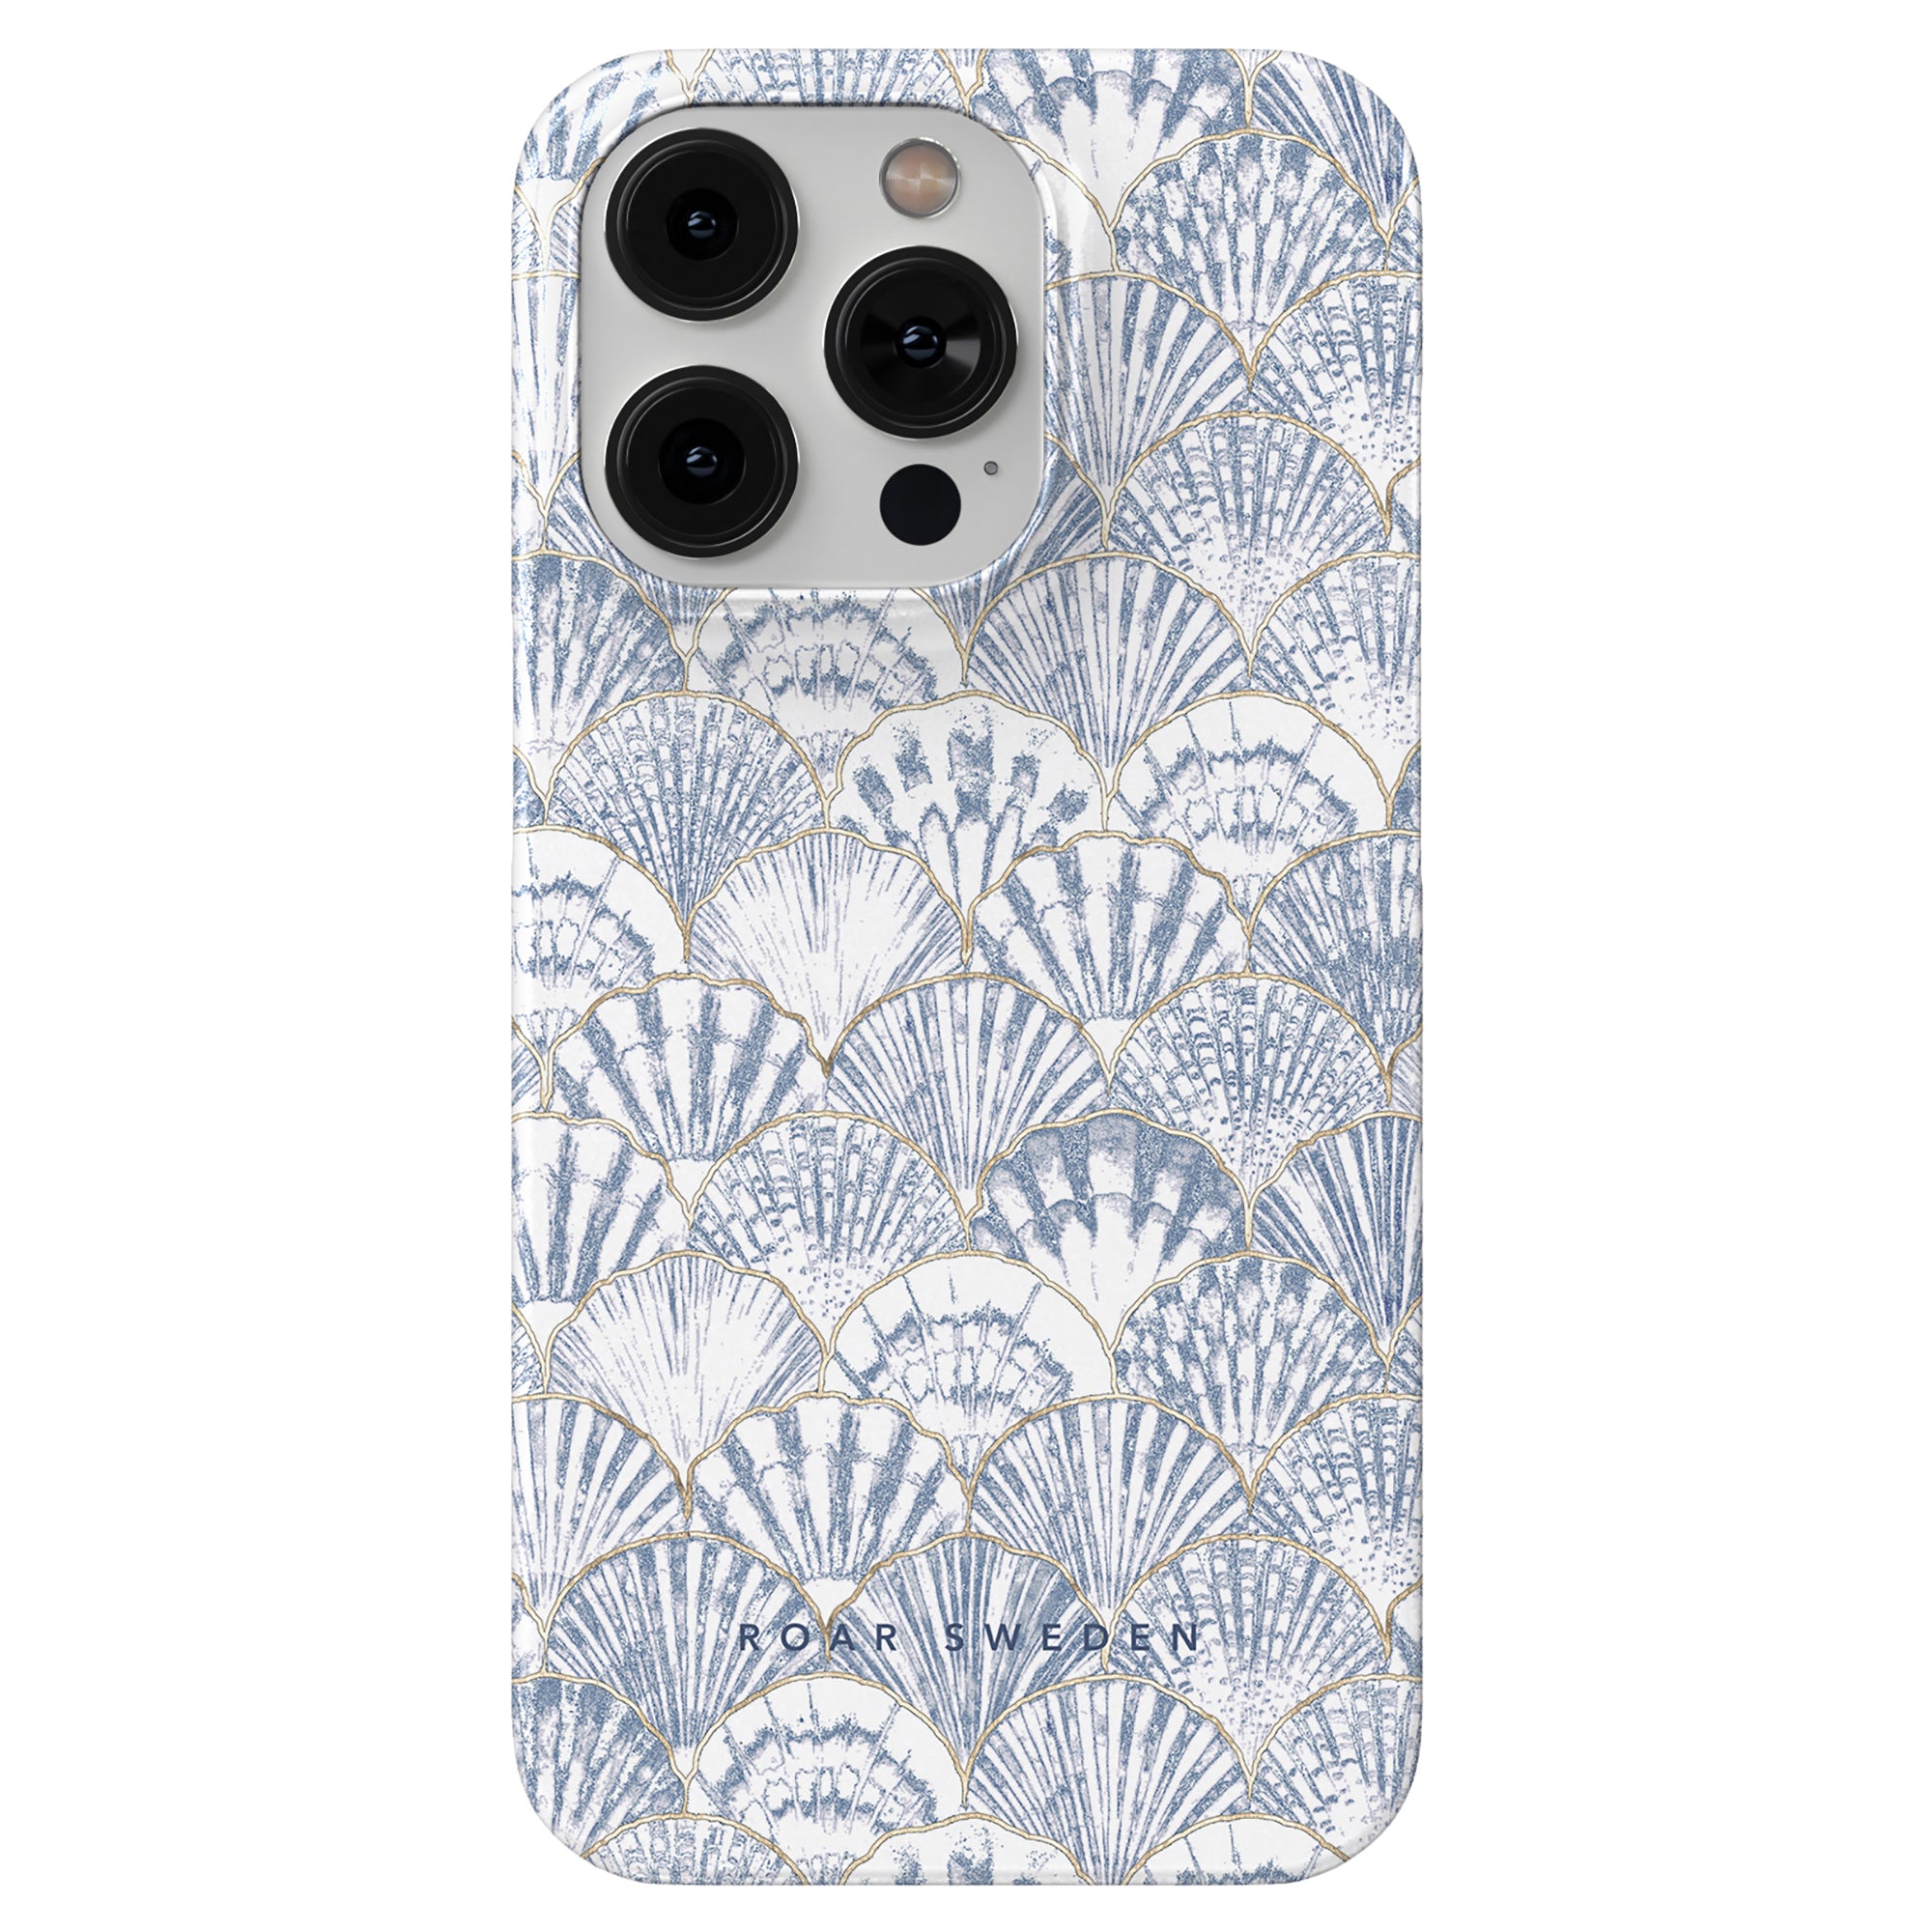 A smartphone with a Valencia slim case featuring a blue seashell pattern from our ocean collection.